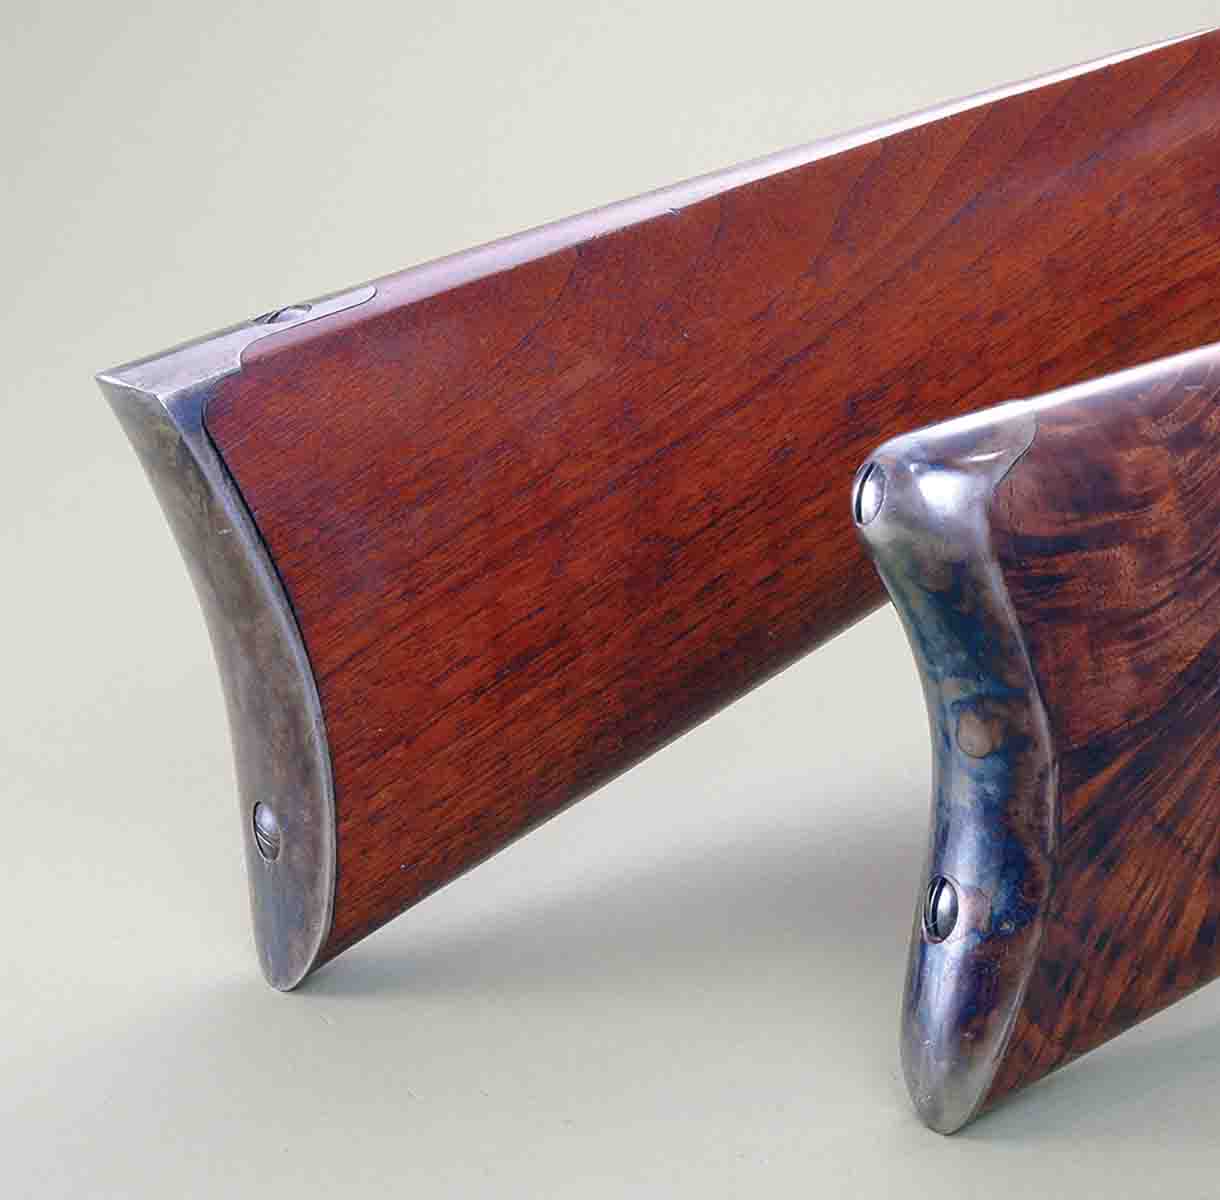 These buttplates are on modern reproductions of late nineteenth-century designs. Mike considers the Remington style (front) as the worst ever designed. The rear one is a reproduction of a Sharps Model 1874 buttplate.